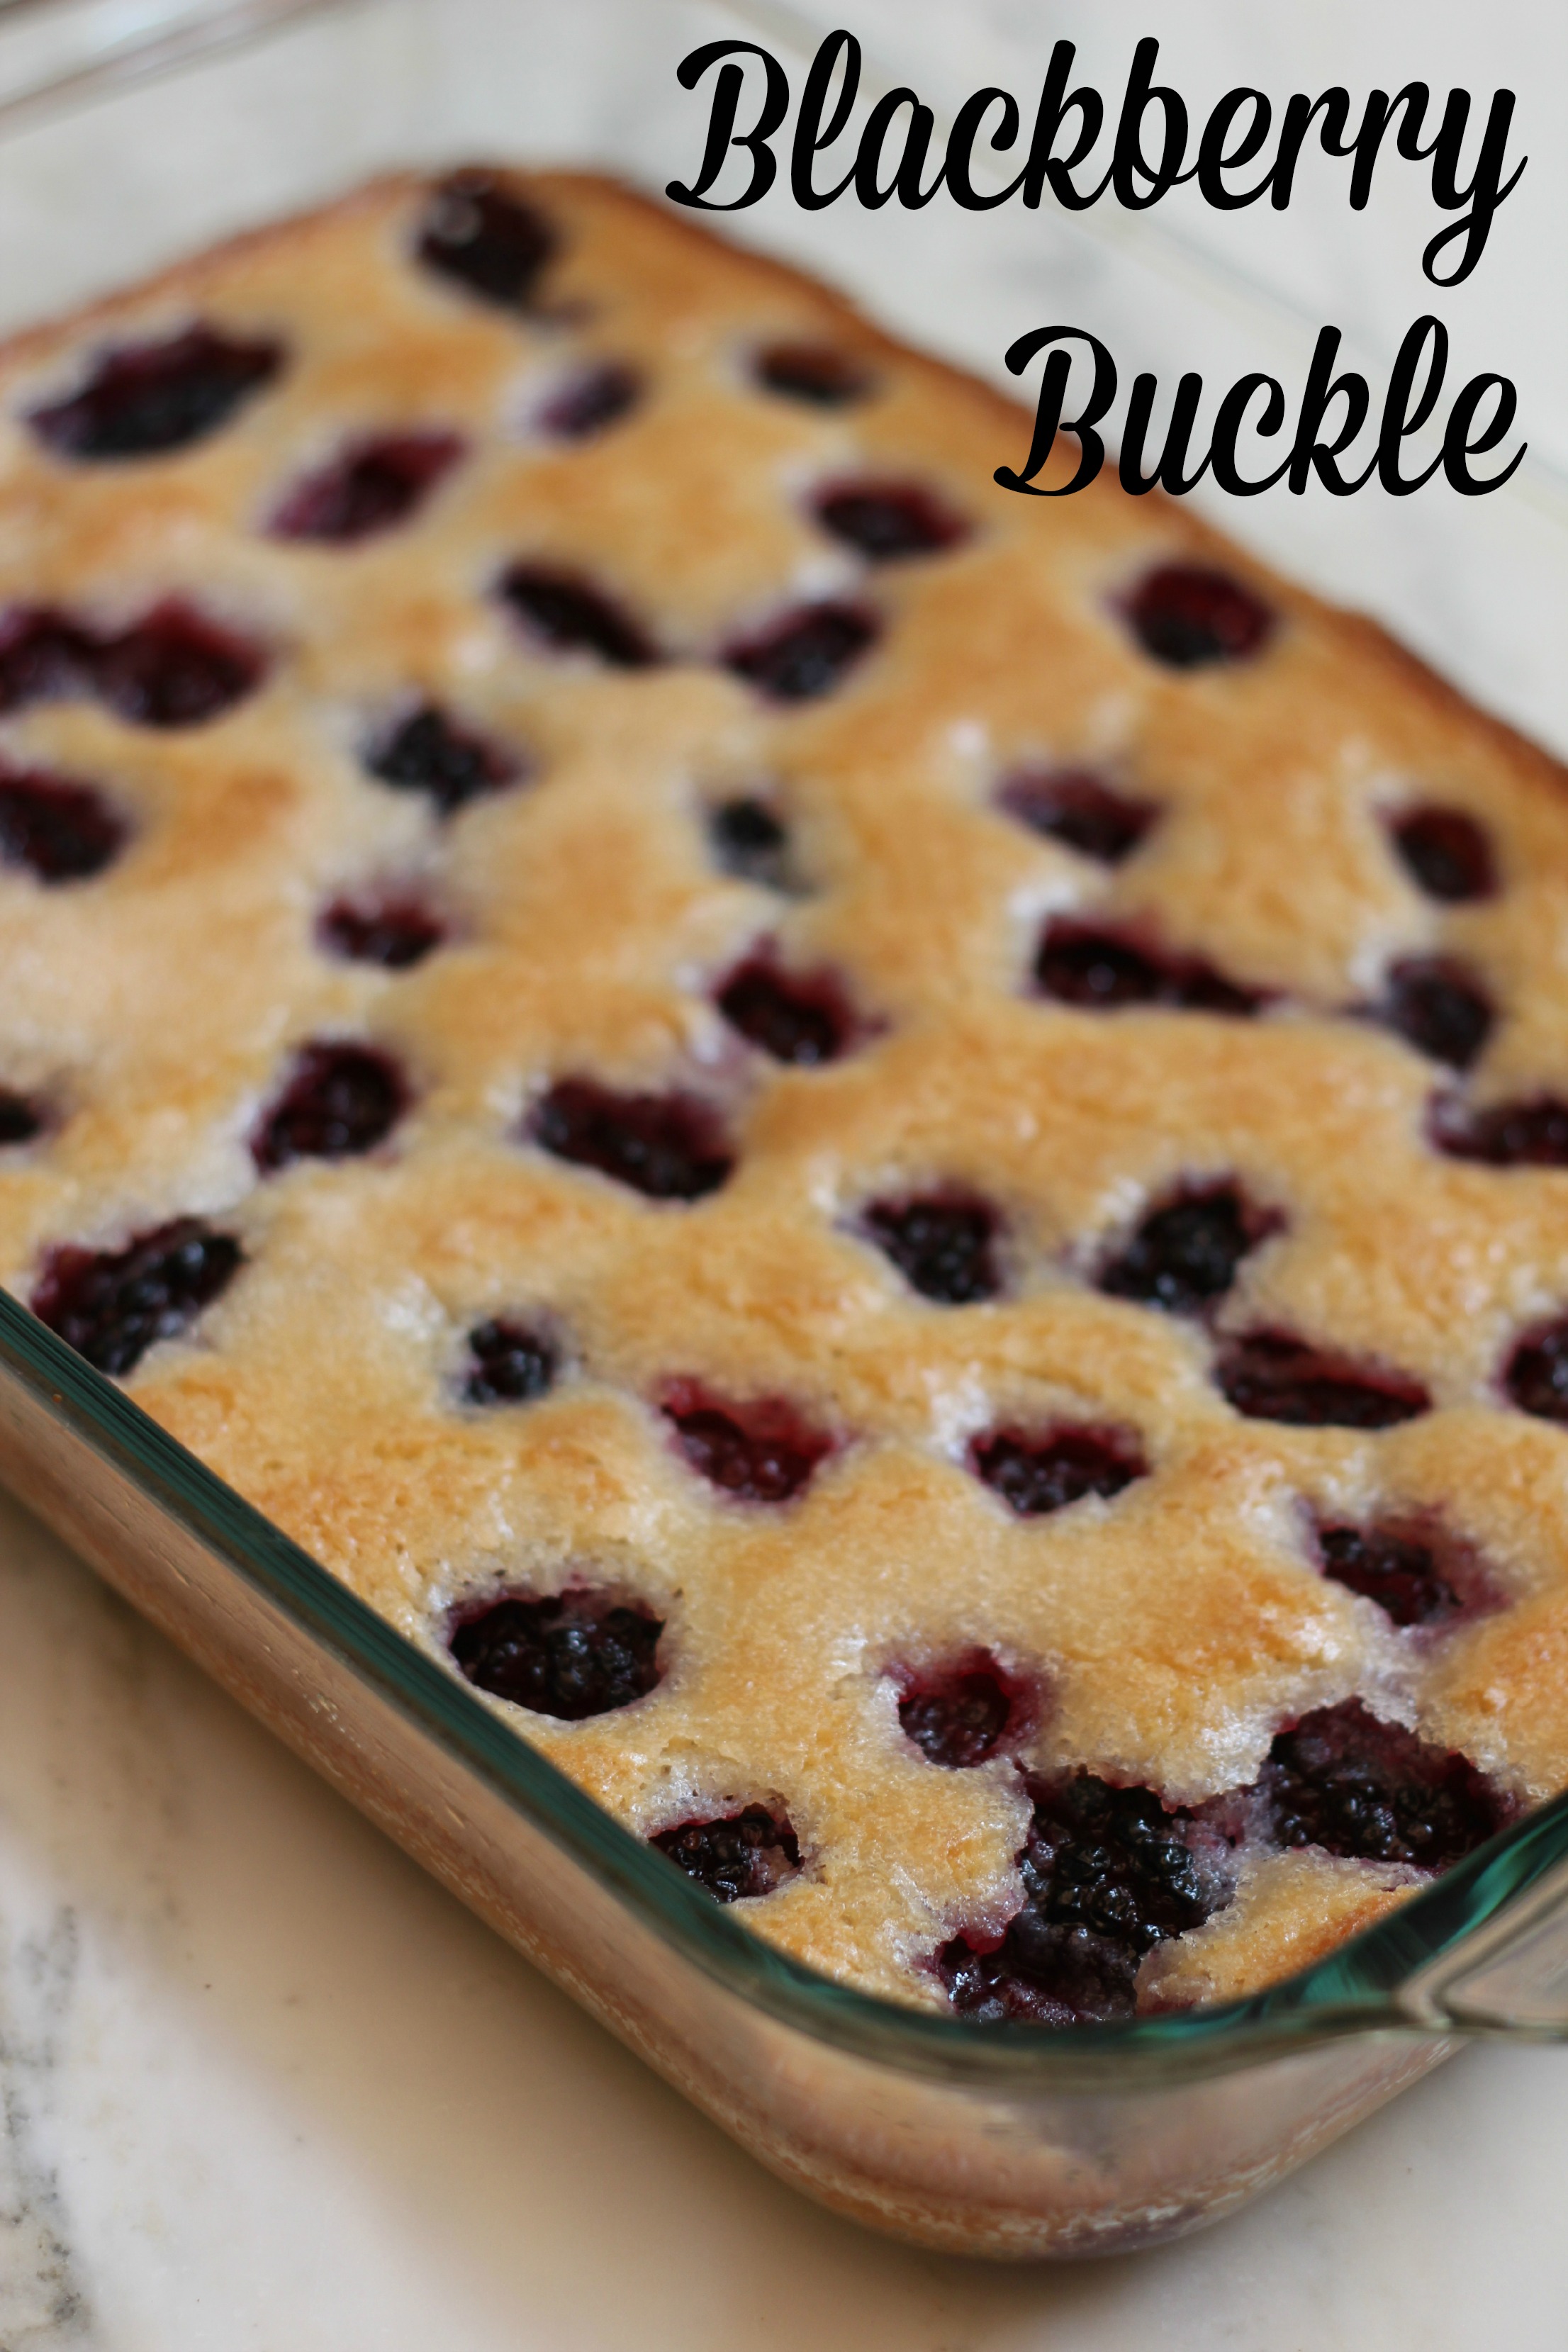 blackberry pickin' and a blackberry buckle recipe - Life in the Green House